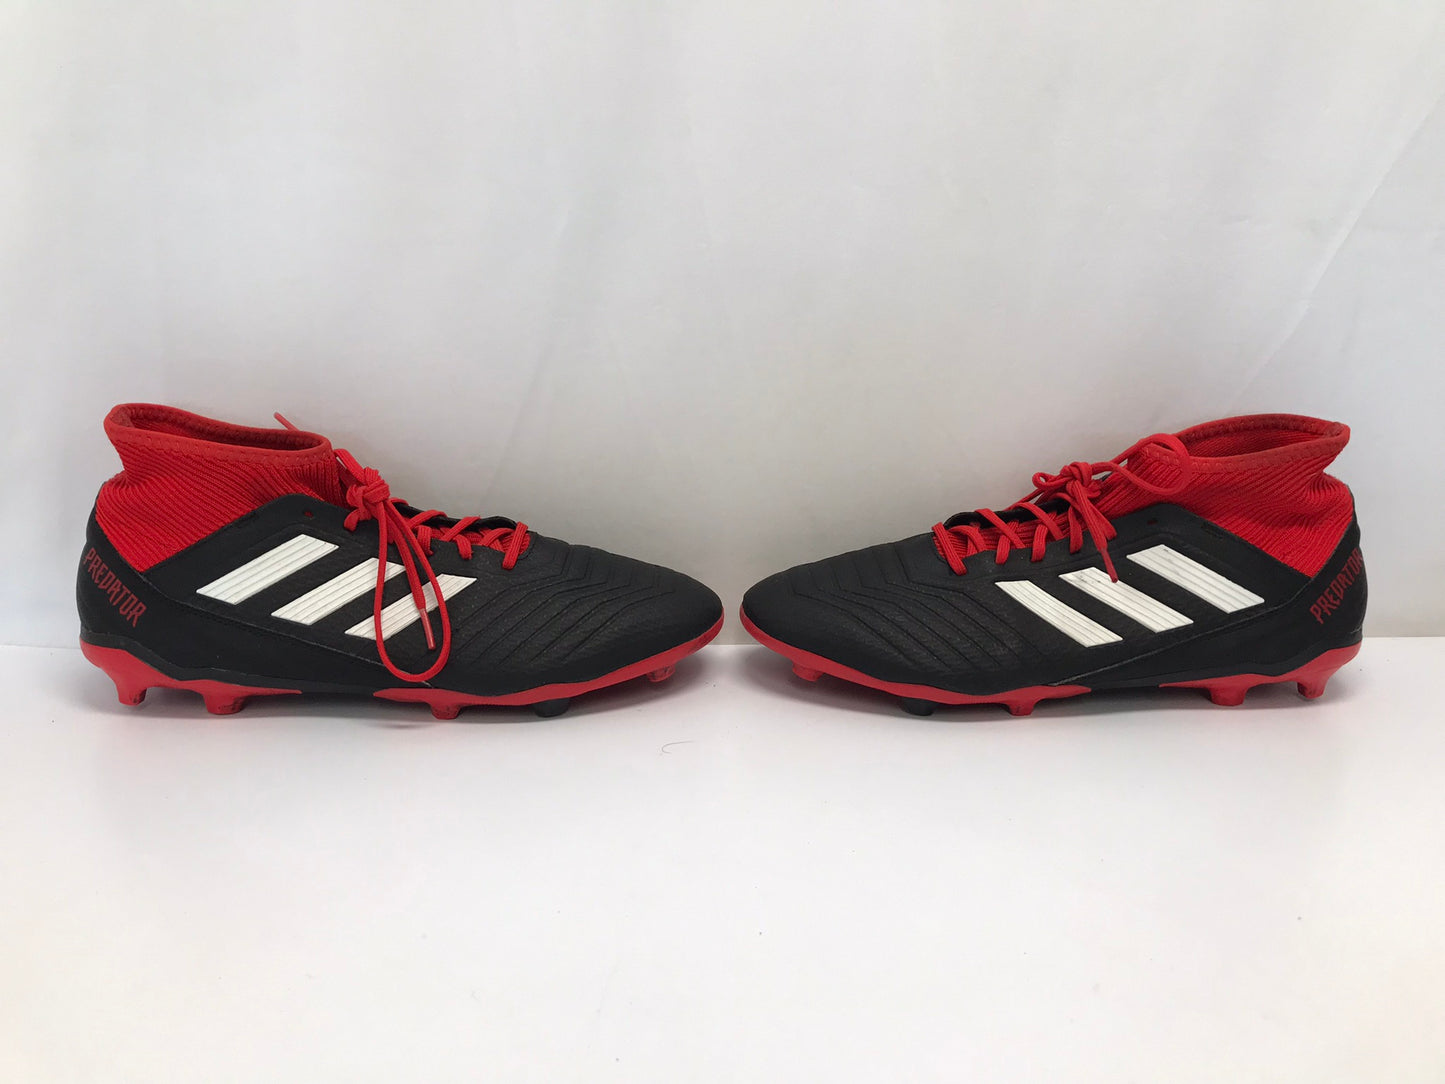 Soccer Shoes Cleats Men's Size 12 Adidas Preditor With Slipper Foot Black Red White